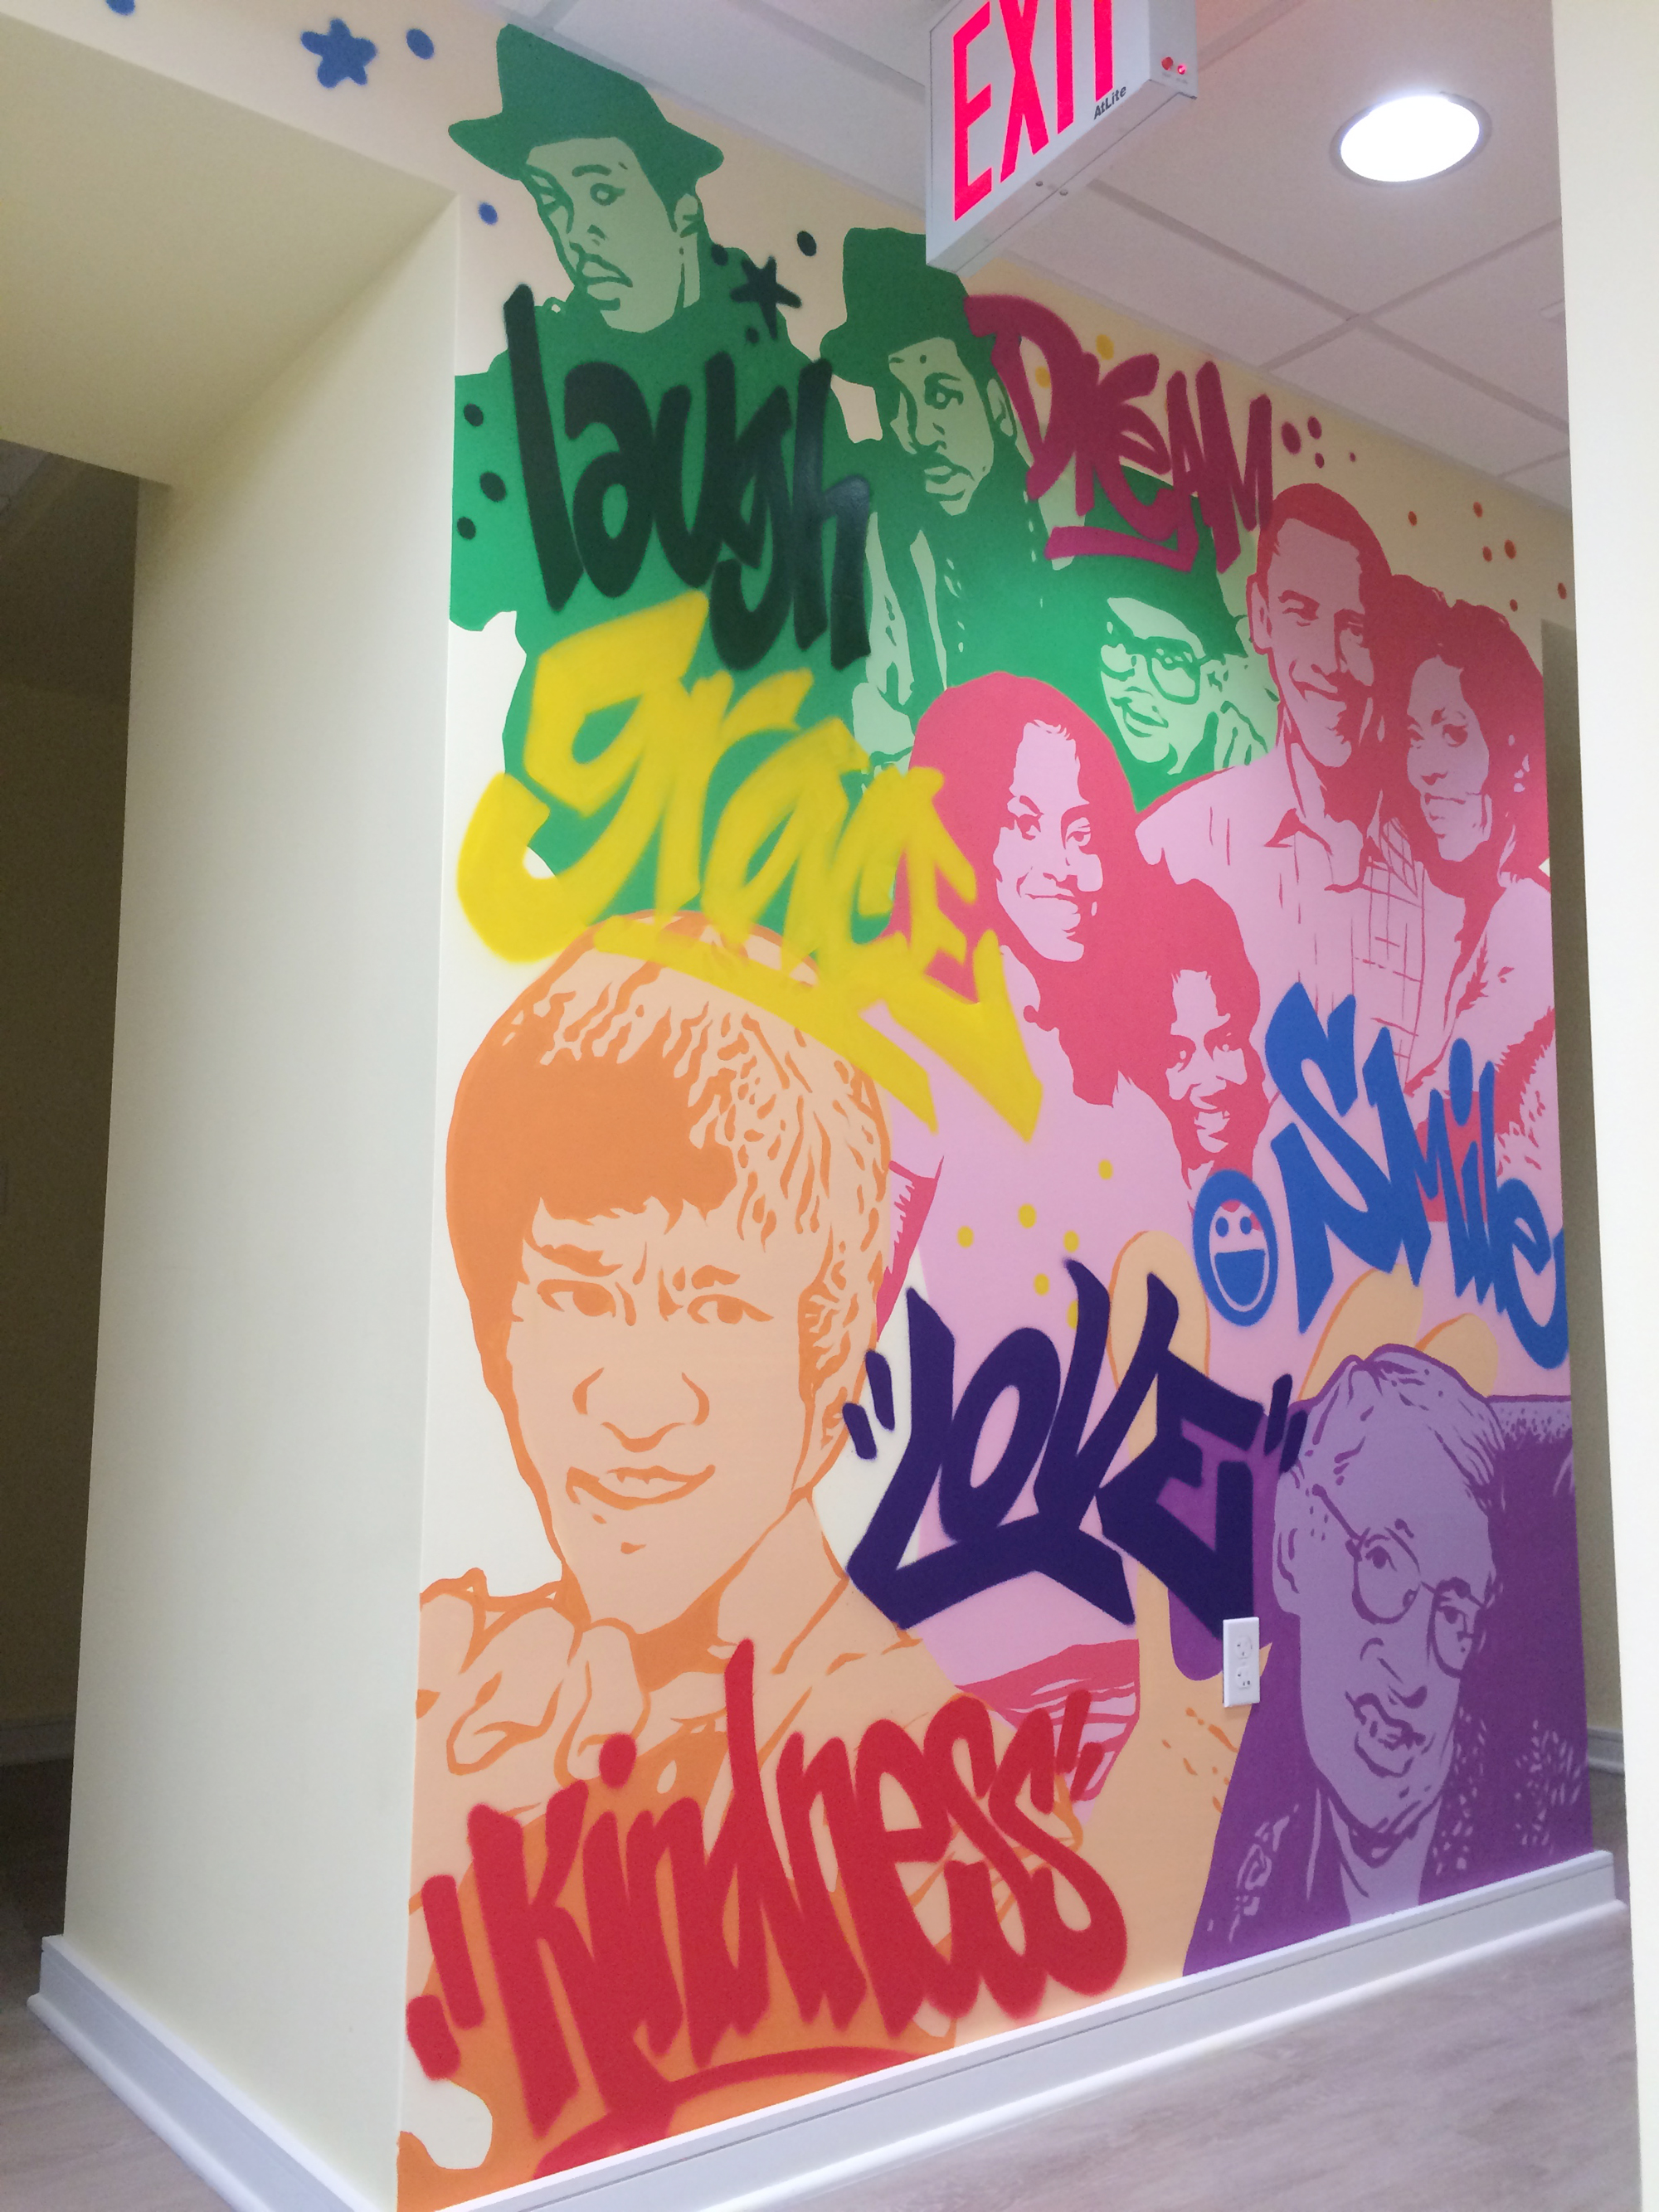 Dentist mural, portraits, Masterpiece NYC, masterpiece murals, hand painted mural, office mural, custom mural, mural, graffiti mural, graffiti artist for hire, graffiti mural, graffiti artist